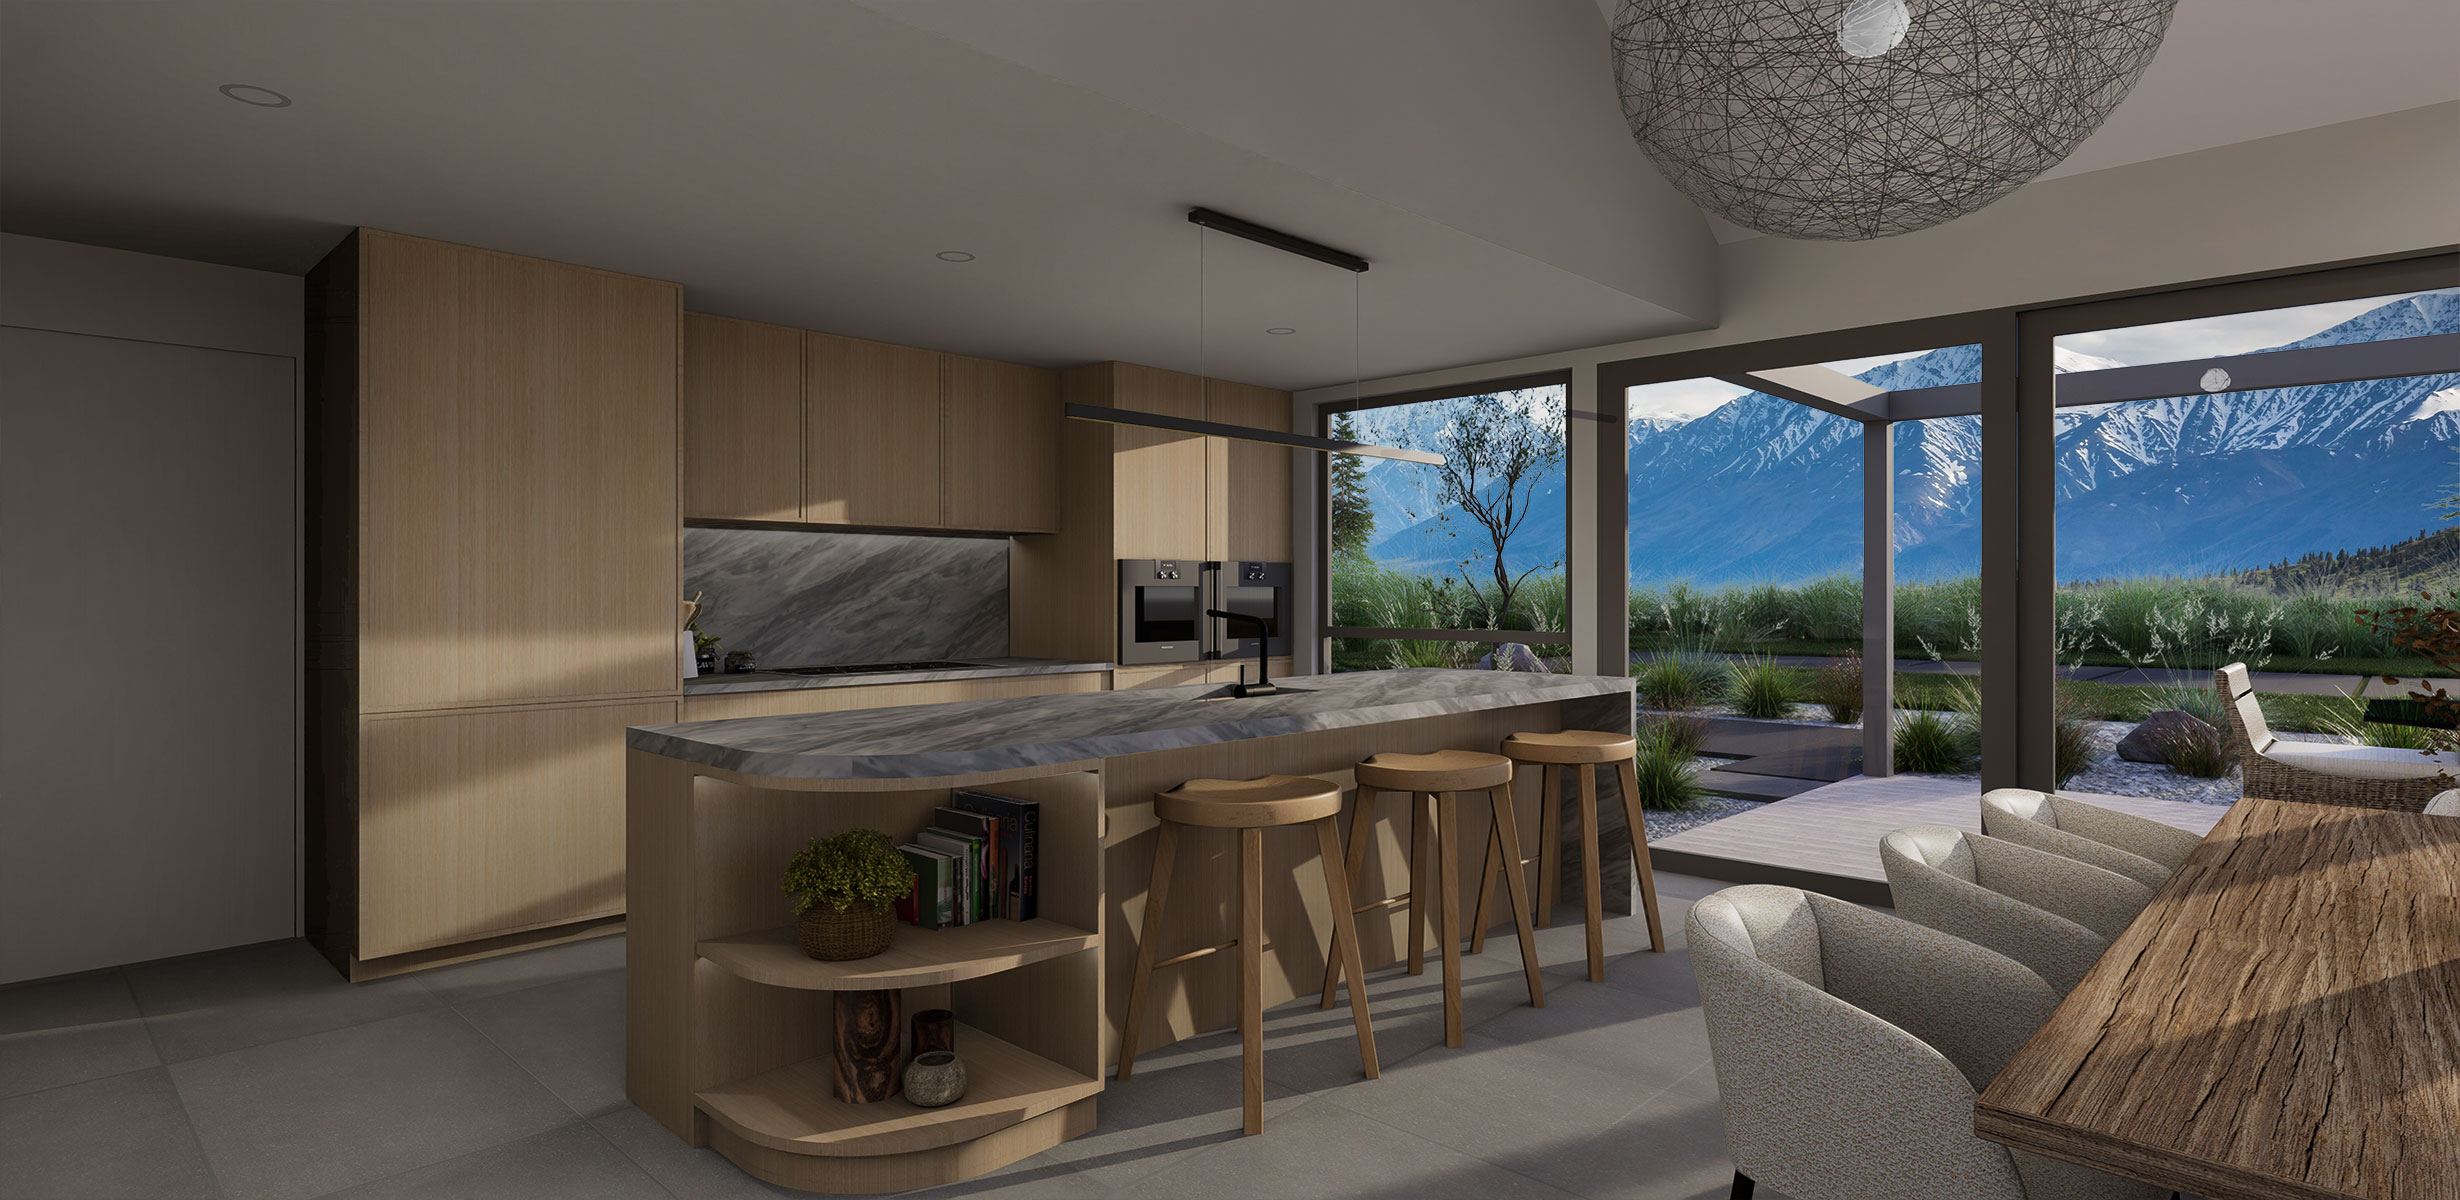 Rakaia House Plan Kitchen View NZ - Our spacious open plan design that seamlessly connects living areas and offers stylish functionality. Enjoy ultimate convenience.